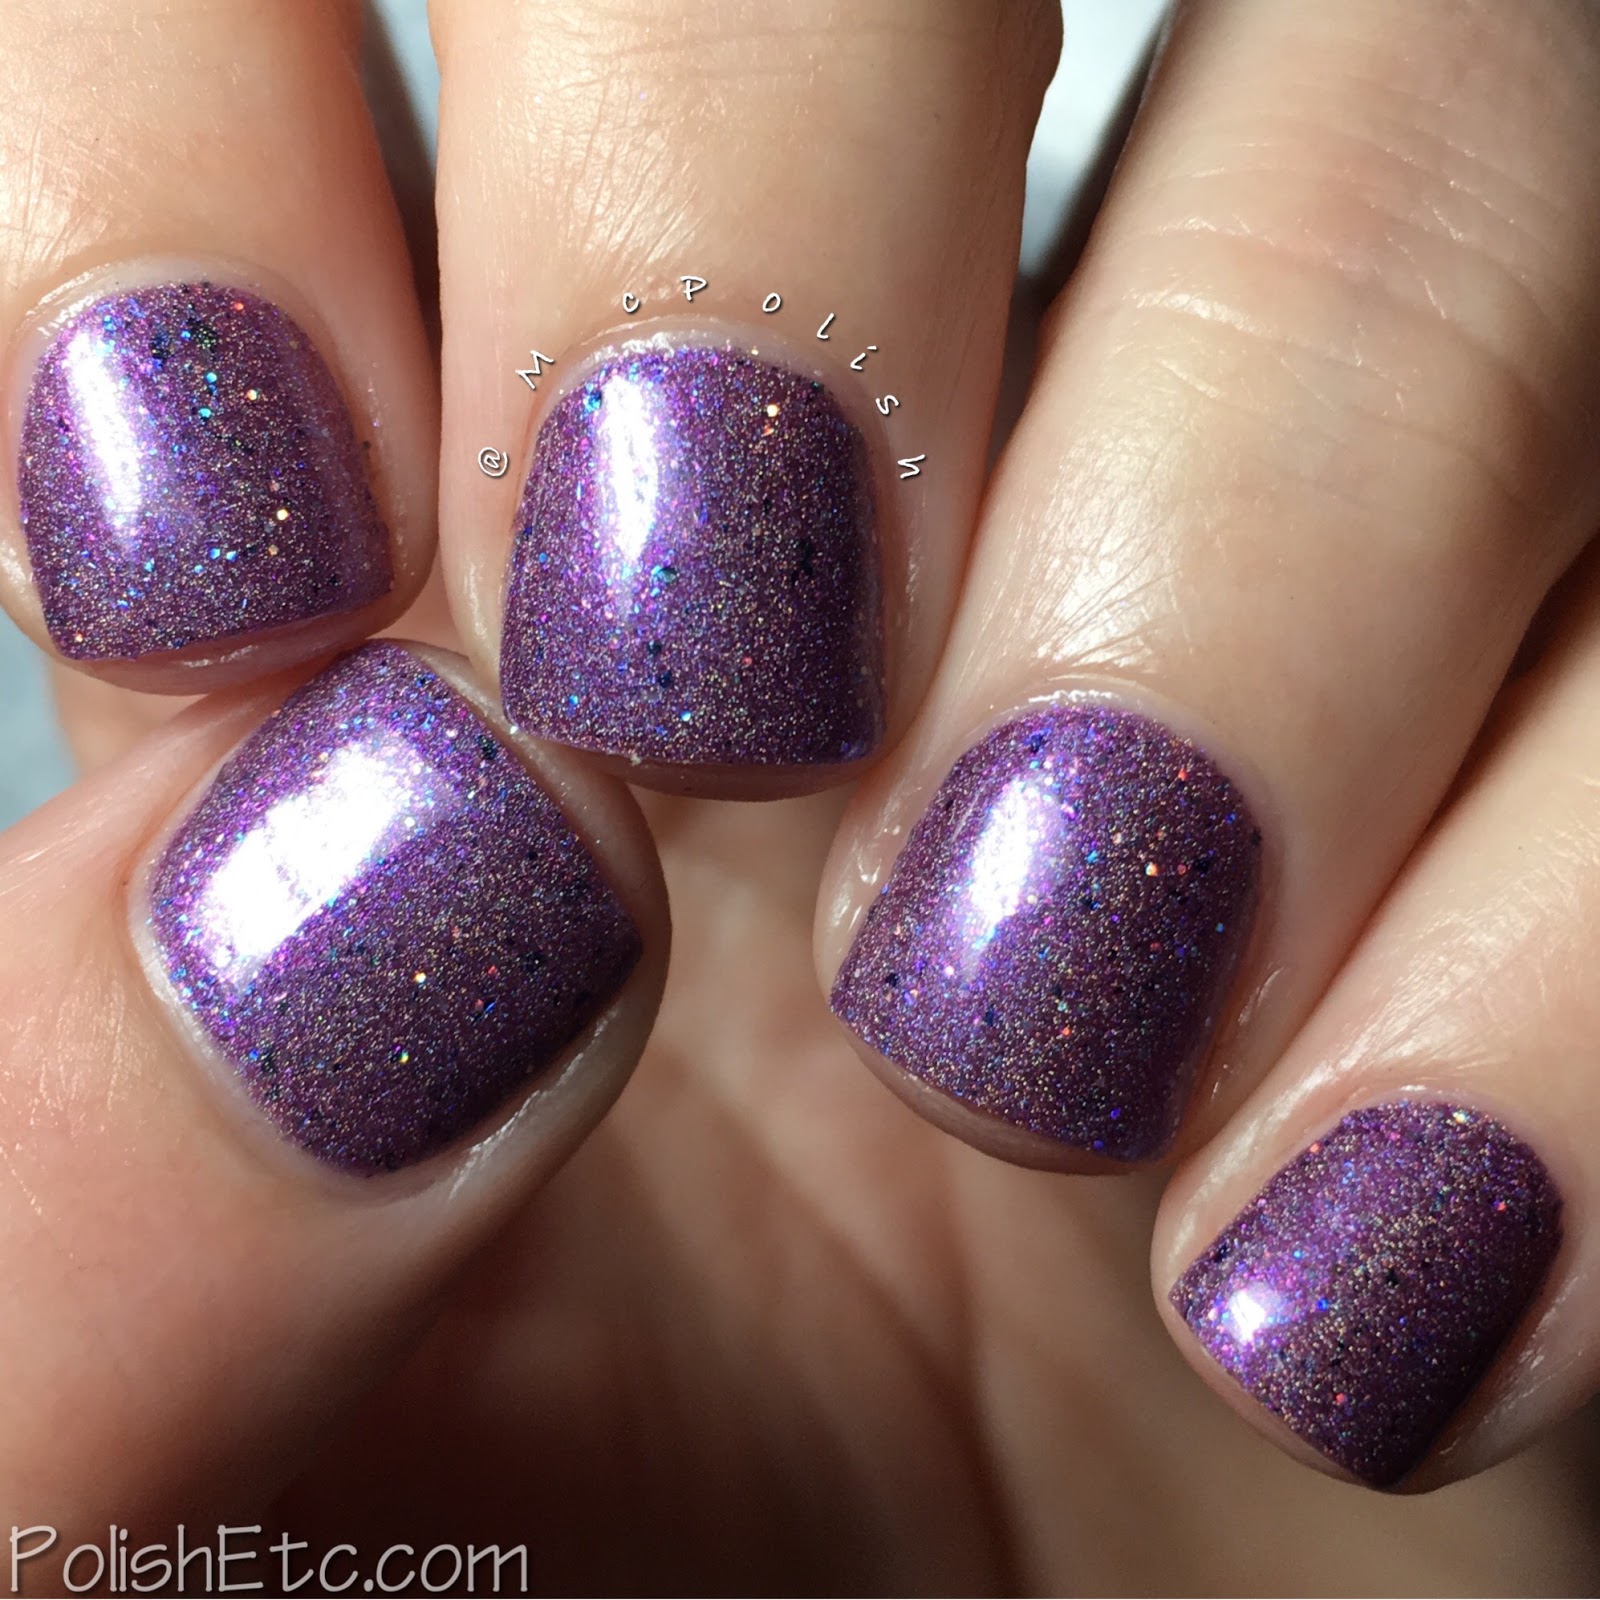 Indies Outside the Box: Fan-tastic Customs - McPolish - Freeze Frame by Girly Bits Cosmetics